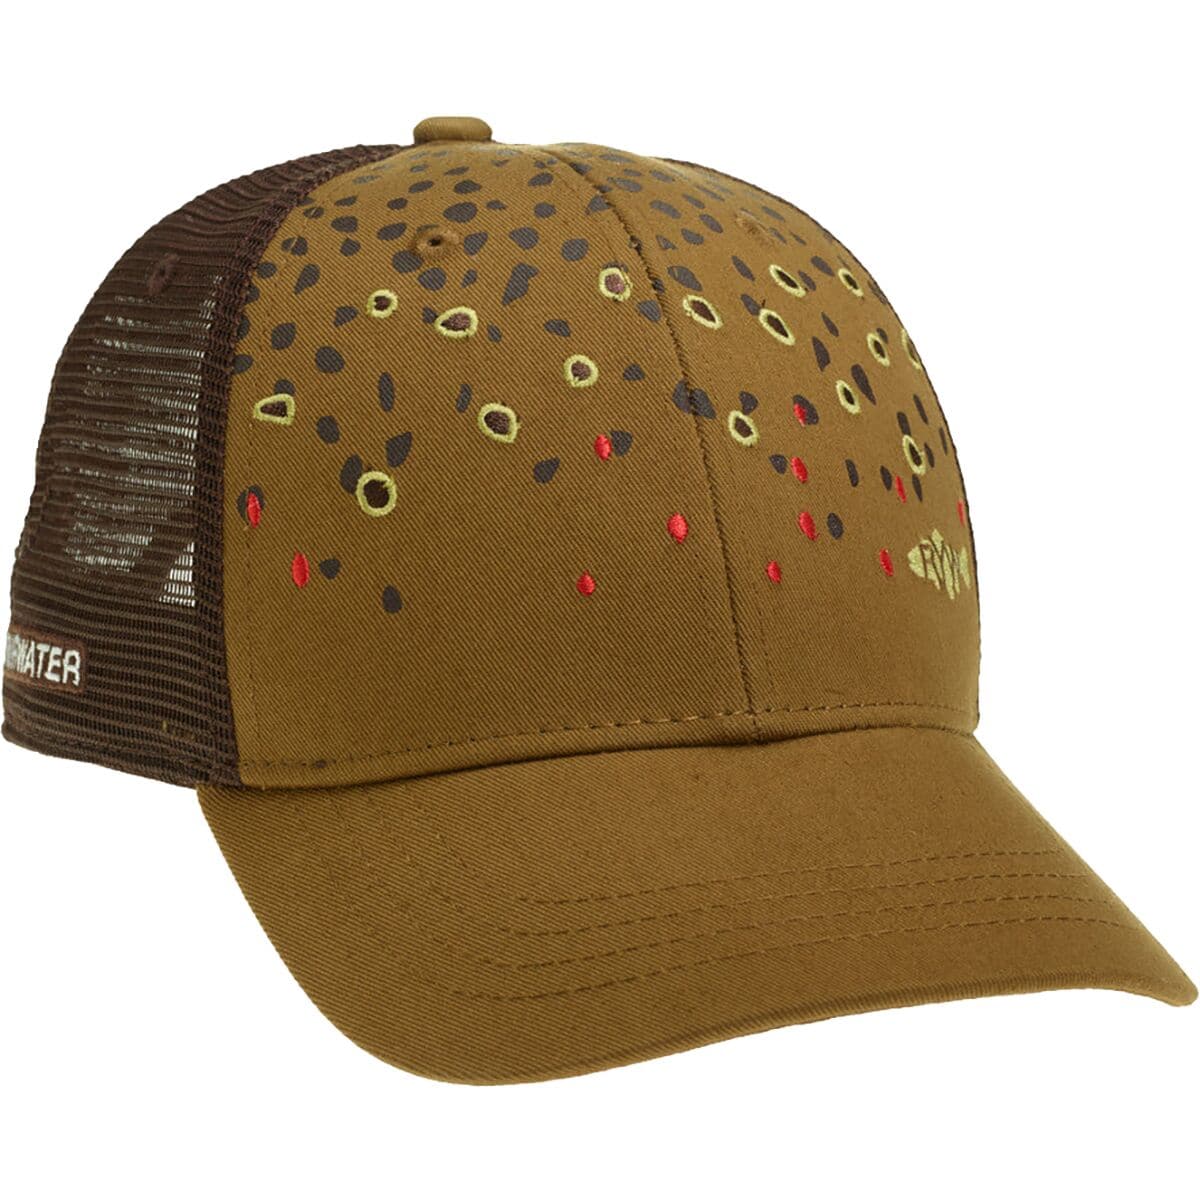 Rep Your Water Brown Trout Skin Trucker Hat